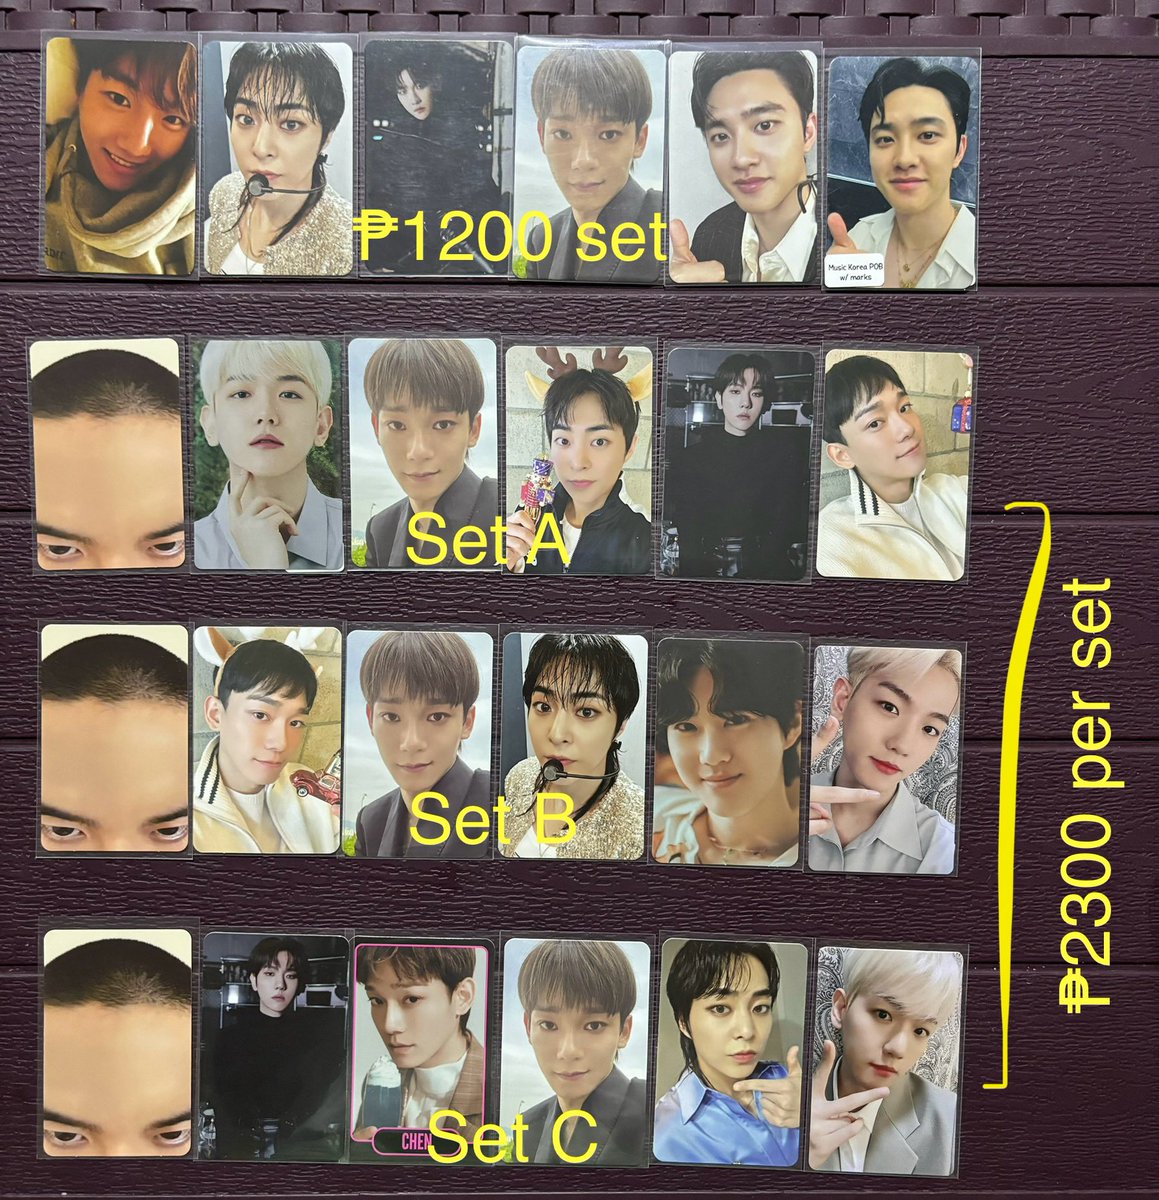 wts lfb ph exo photocards #LenSells
pls help rt ~

- onhand
- ₱30 dp ea pc / 2weeks rembal
- x sensi
- sco / sdd / direct jnt 
- CAN STEAL IF GETTING MORE

reply/dm mine + ss

🏷️ baekhyun chanyeol do kyungsoo suho sehun kai chen xiumin lonsdaleite trading card exist sg 2024…